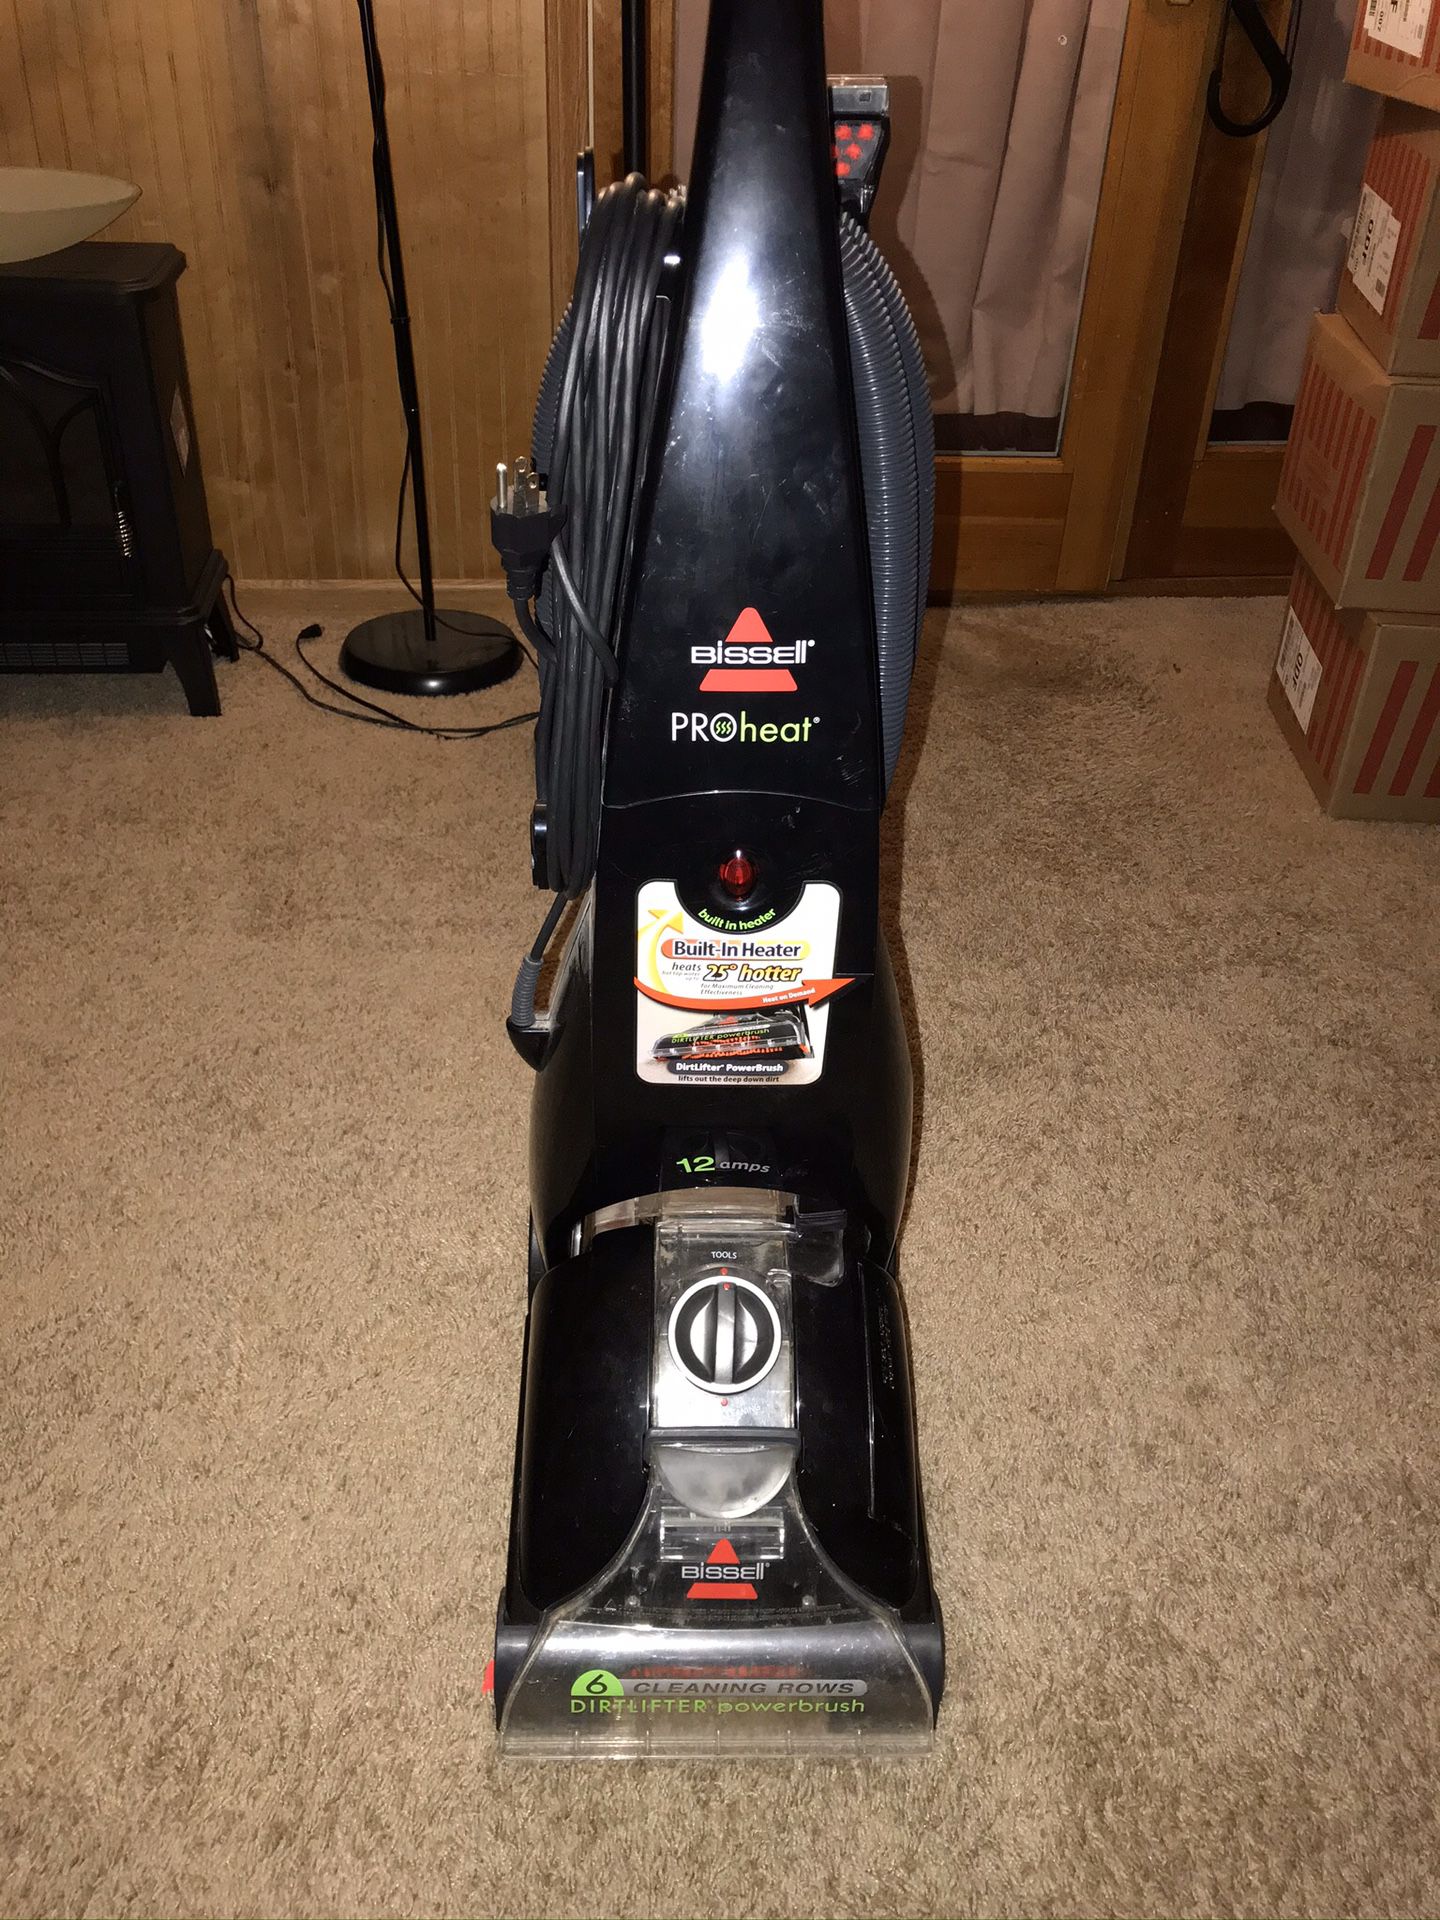 Bissell ProHeat carpet cleaner.